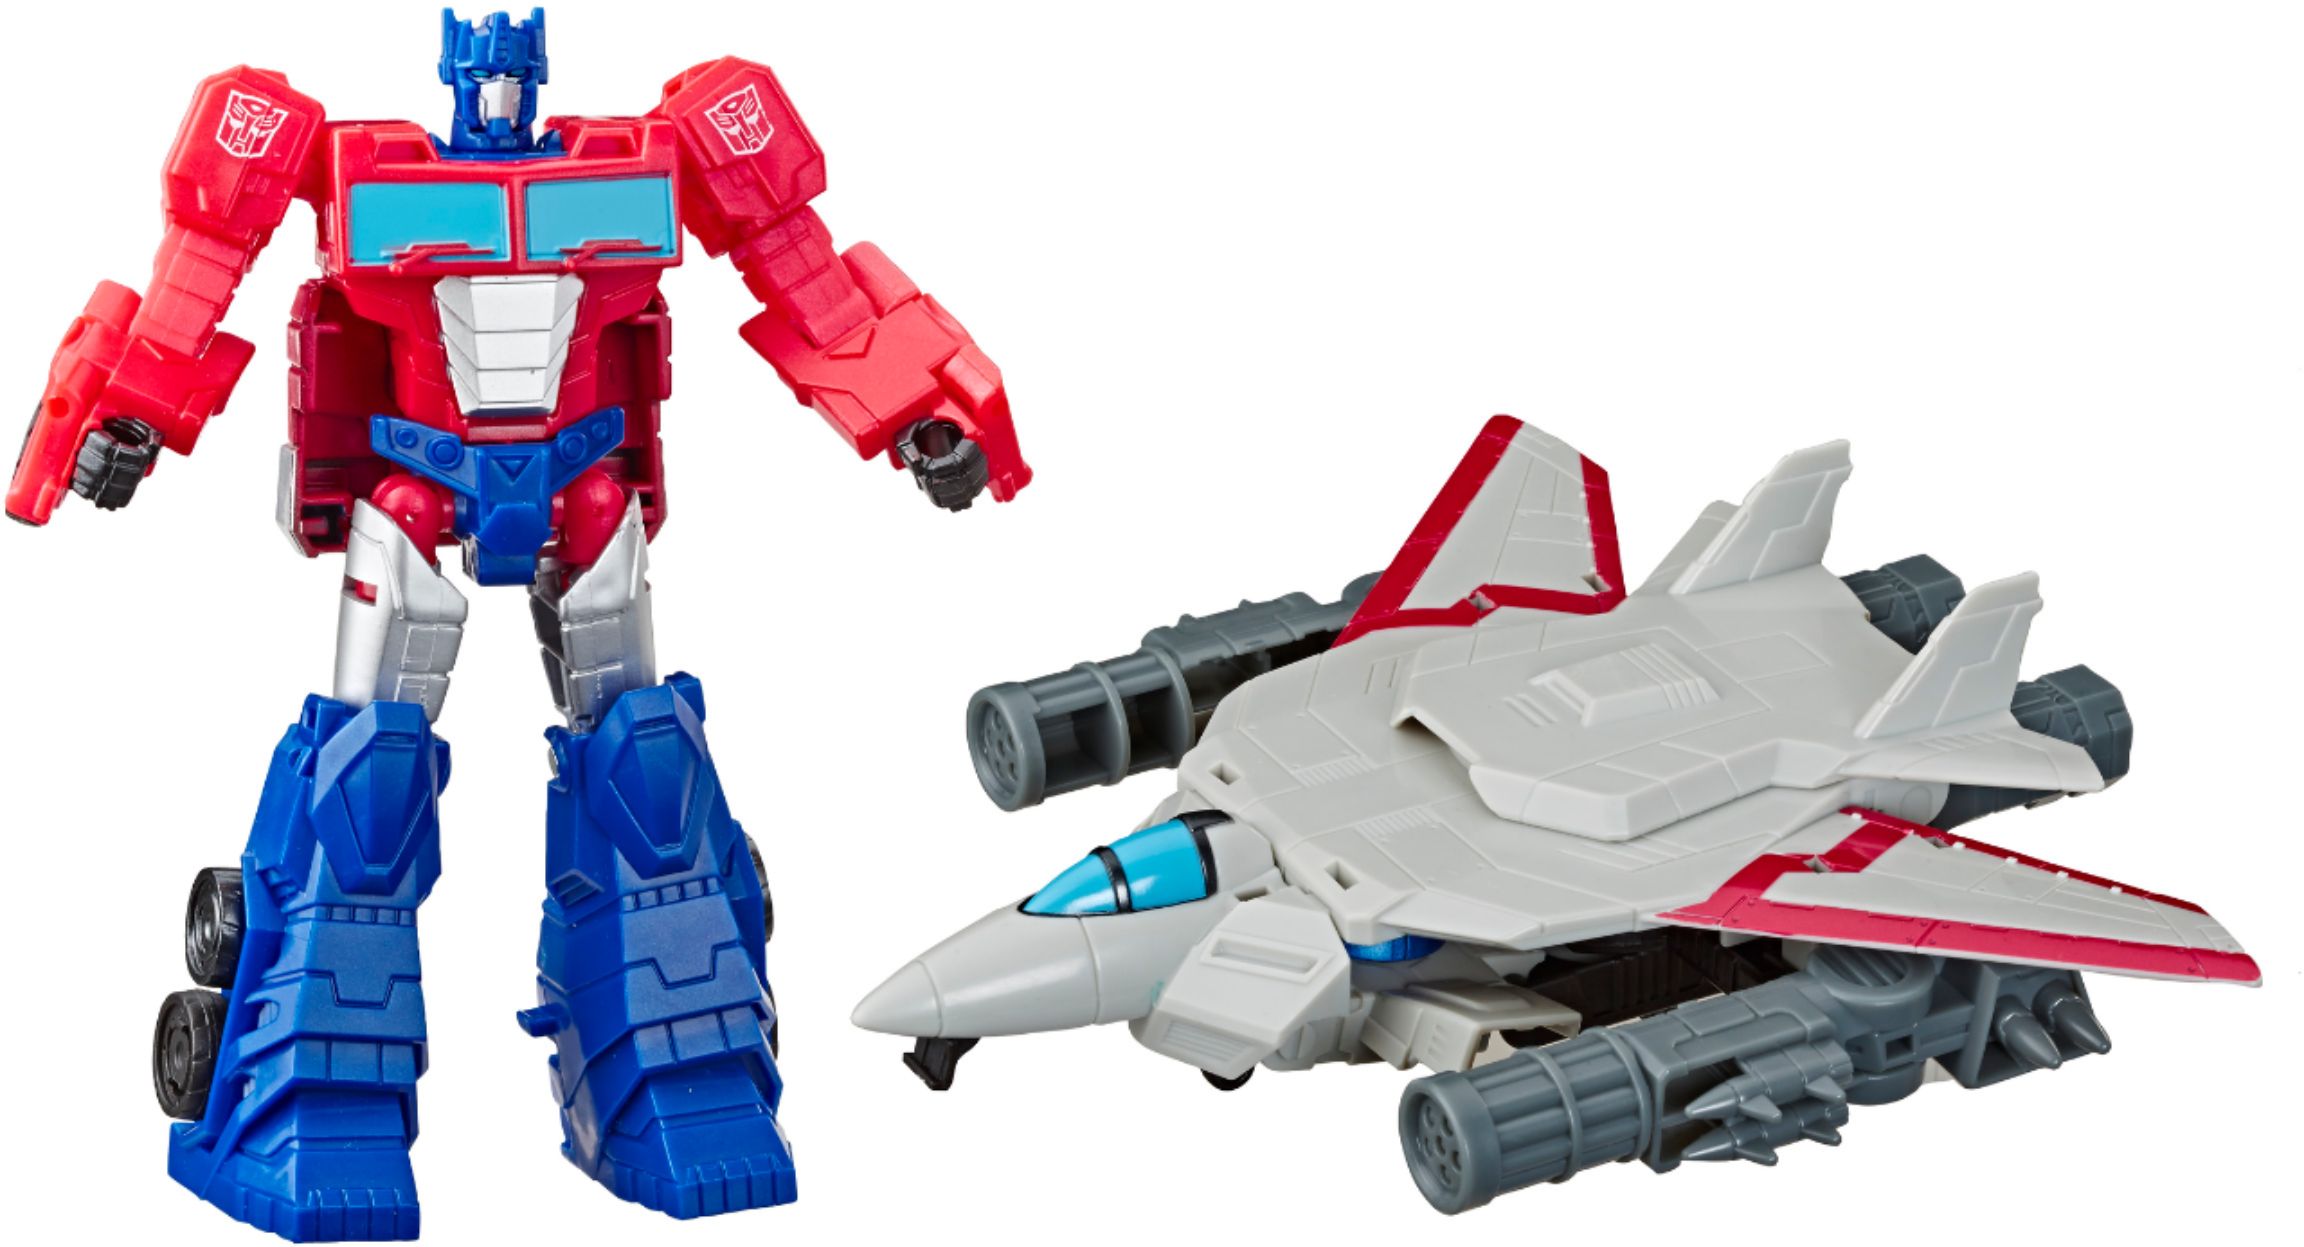 Hasbro - Transformers Cyberverse Spark Armor 5" Optimus Prime Action Figure - Styles May Vary